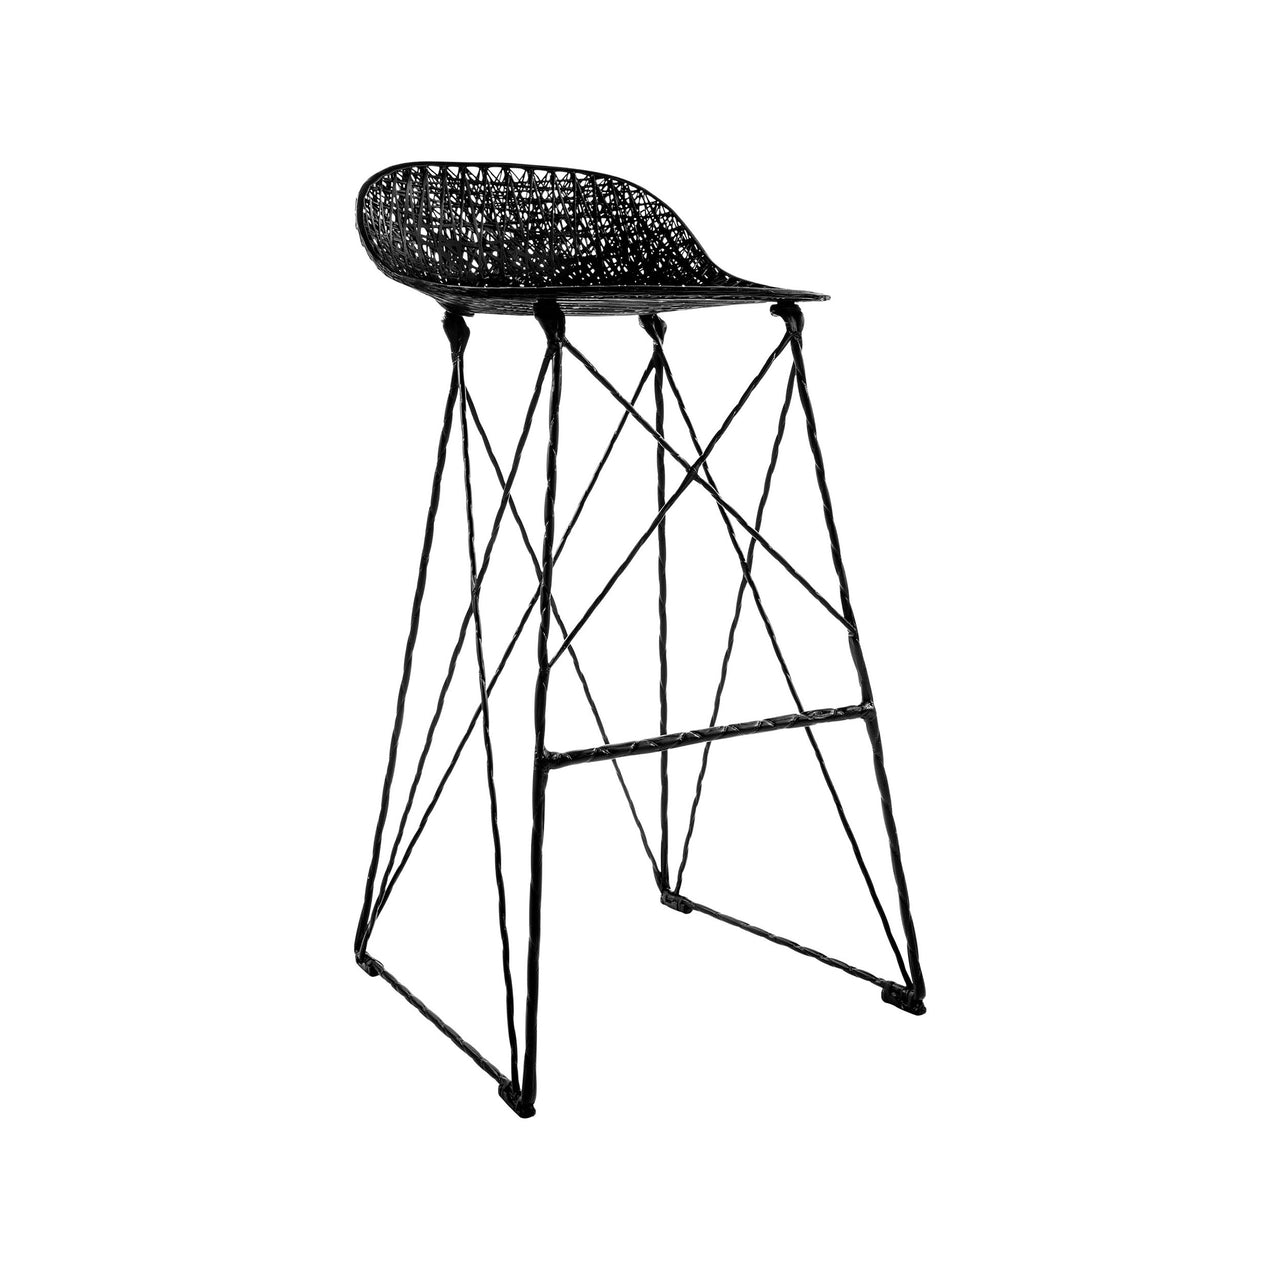 Carbon Bar + Counter Stool: Counter + Without Seat Pad